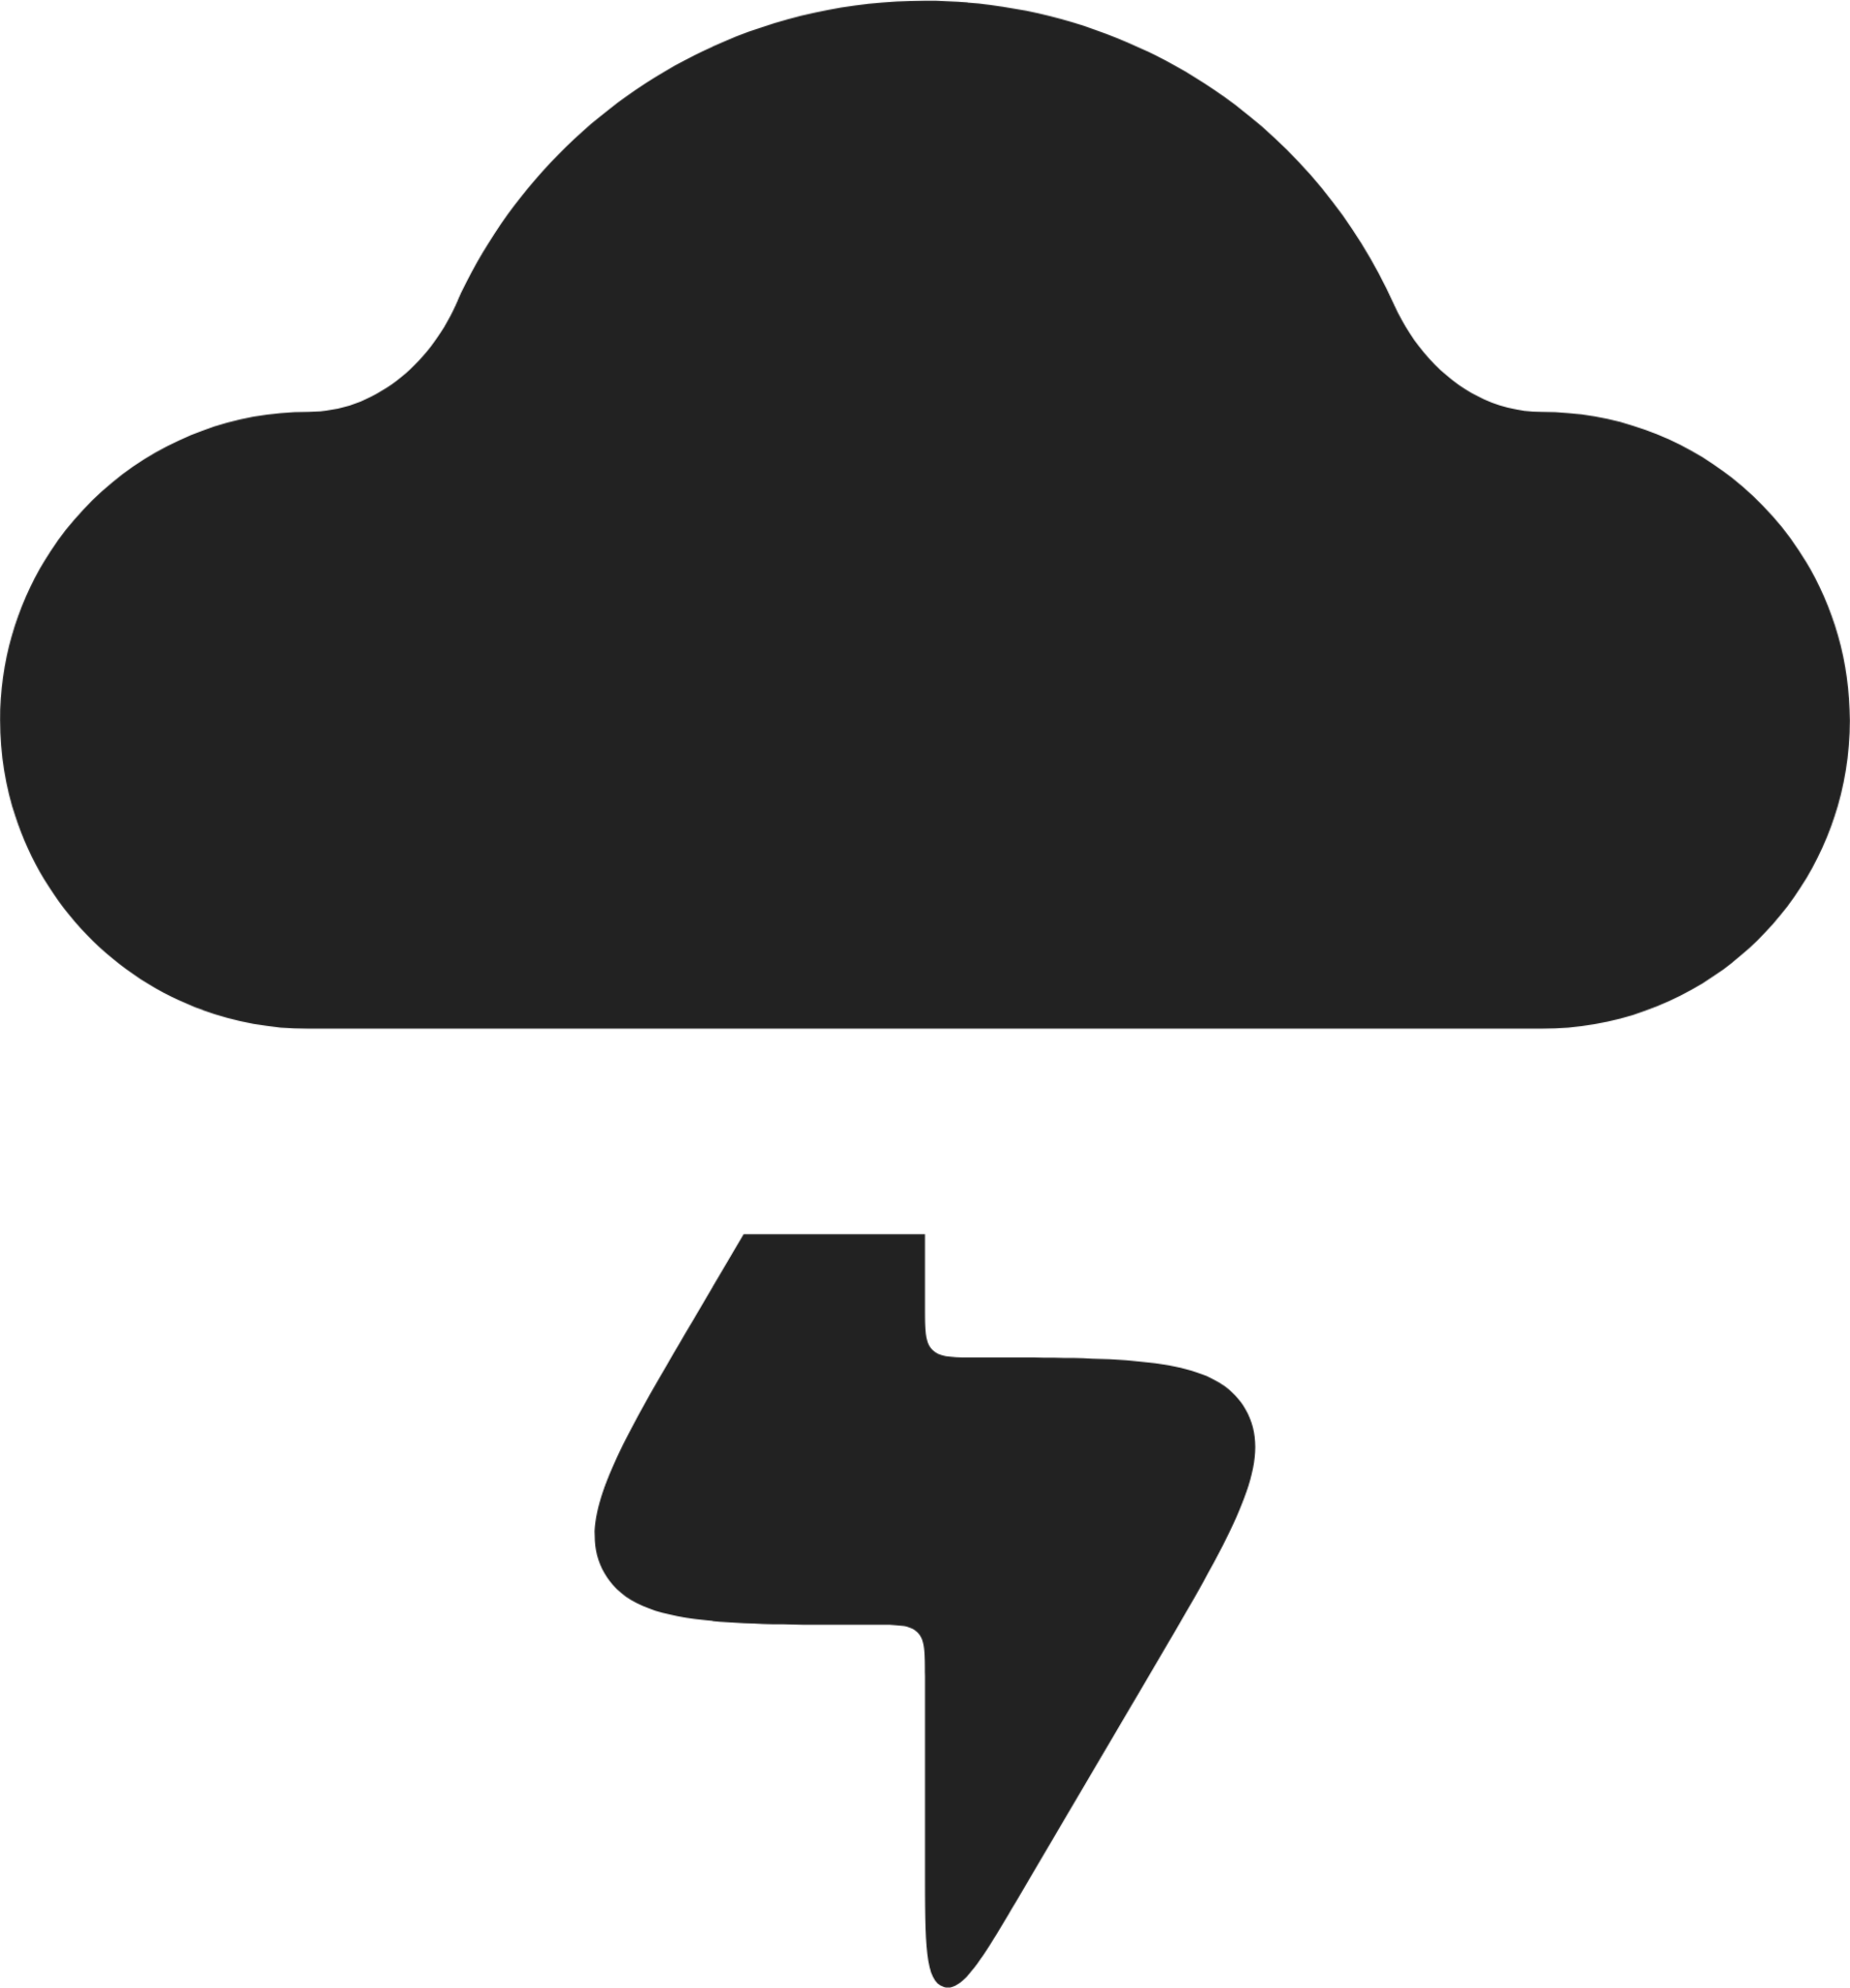 Storm fill icon